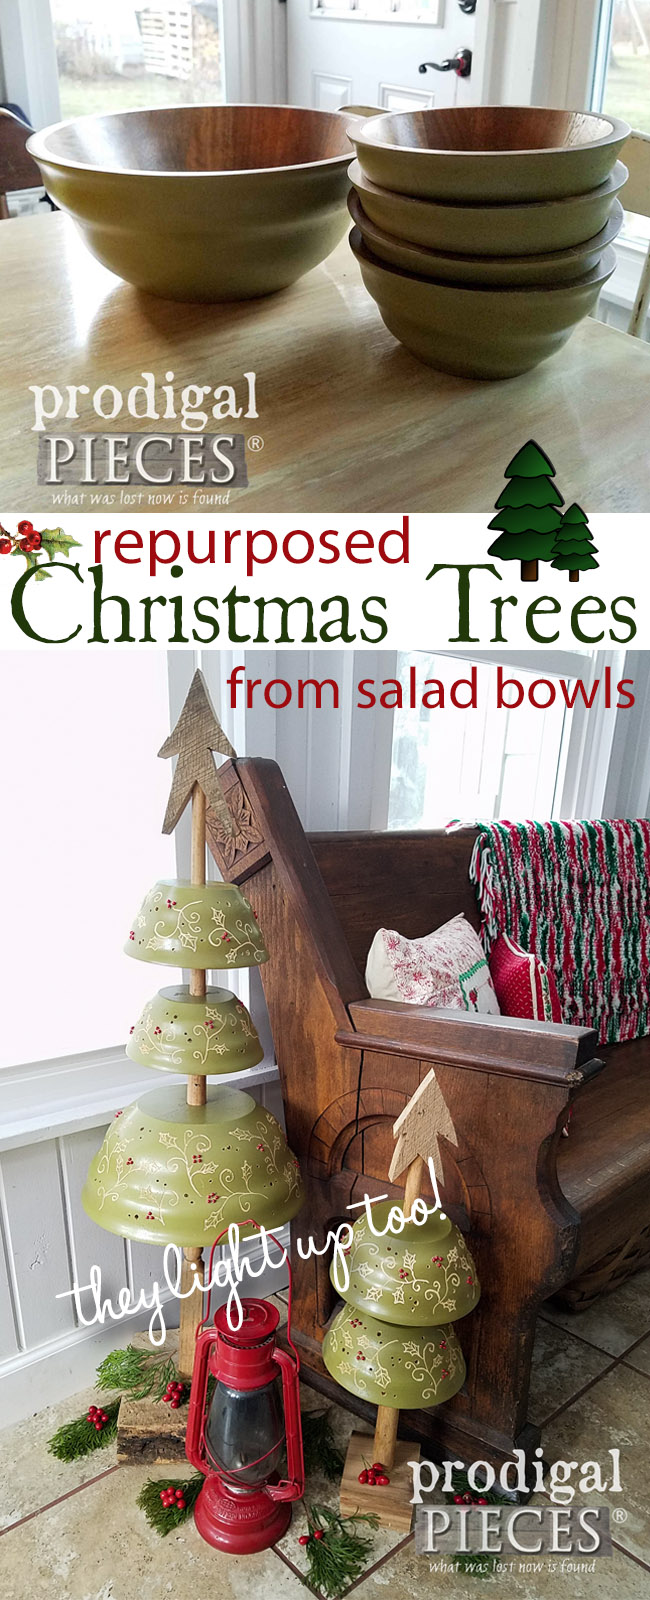 So cute! Who knew a set of old wooden salad bowls could look so whimsical as repurposed Christmas trees? See how Larissa of Prodigal Pieces did it here at prodigalpieces.com